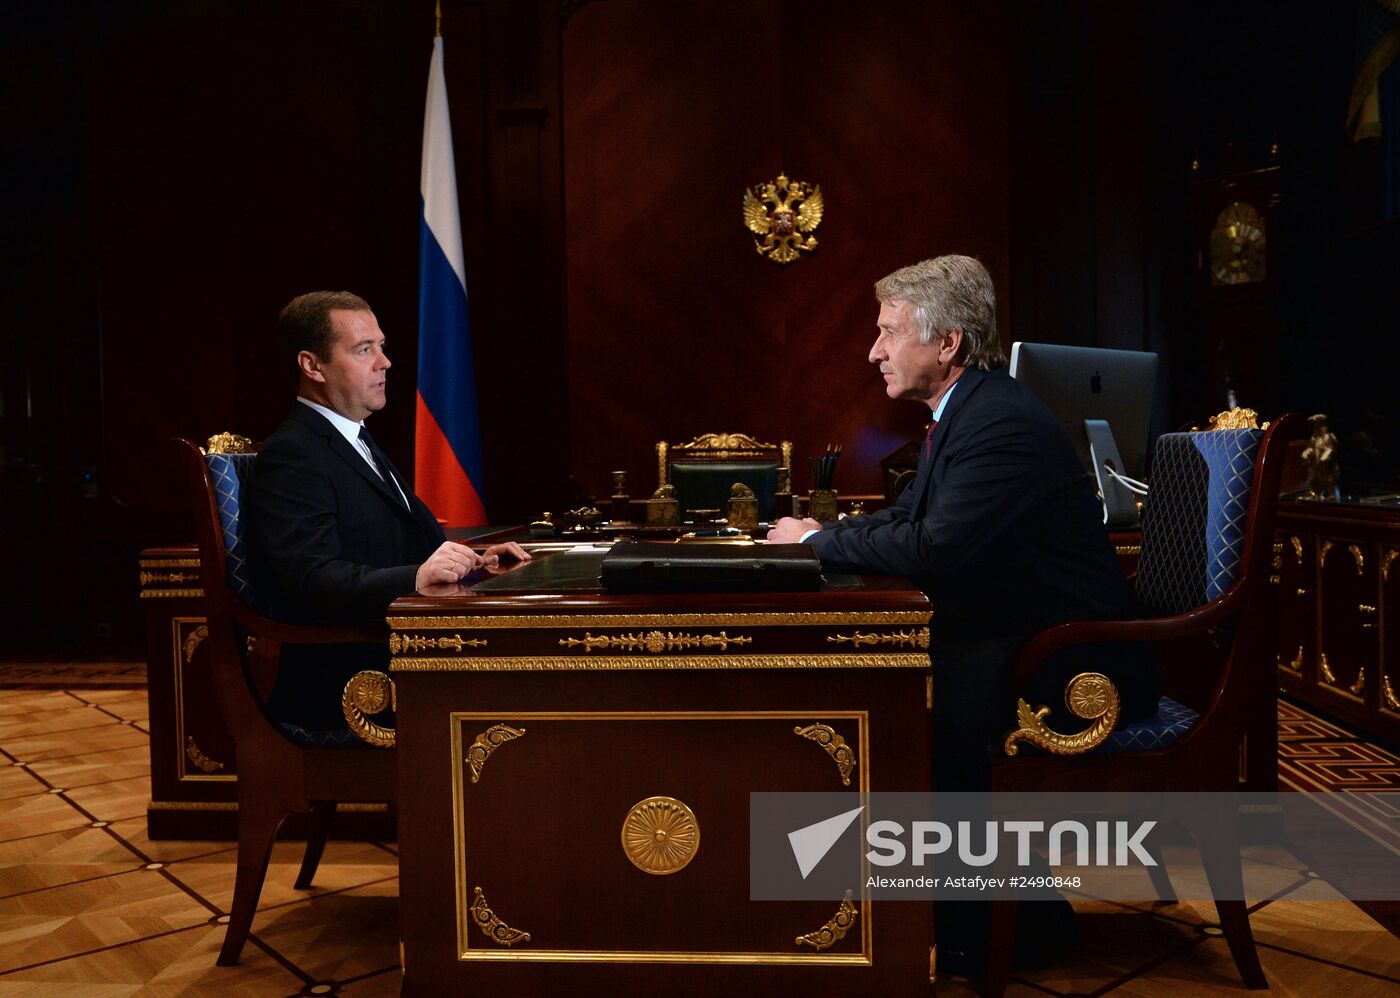 Dmitry Medvedev meets with Leonid Michelson